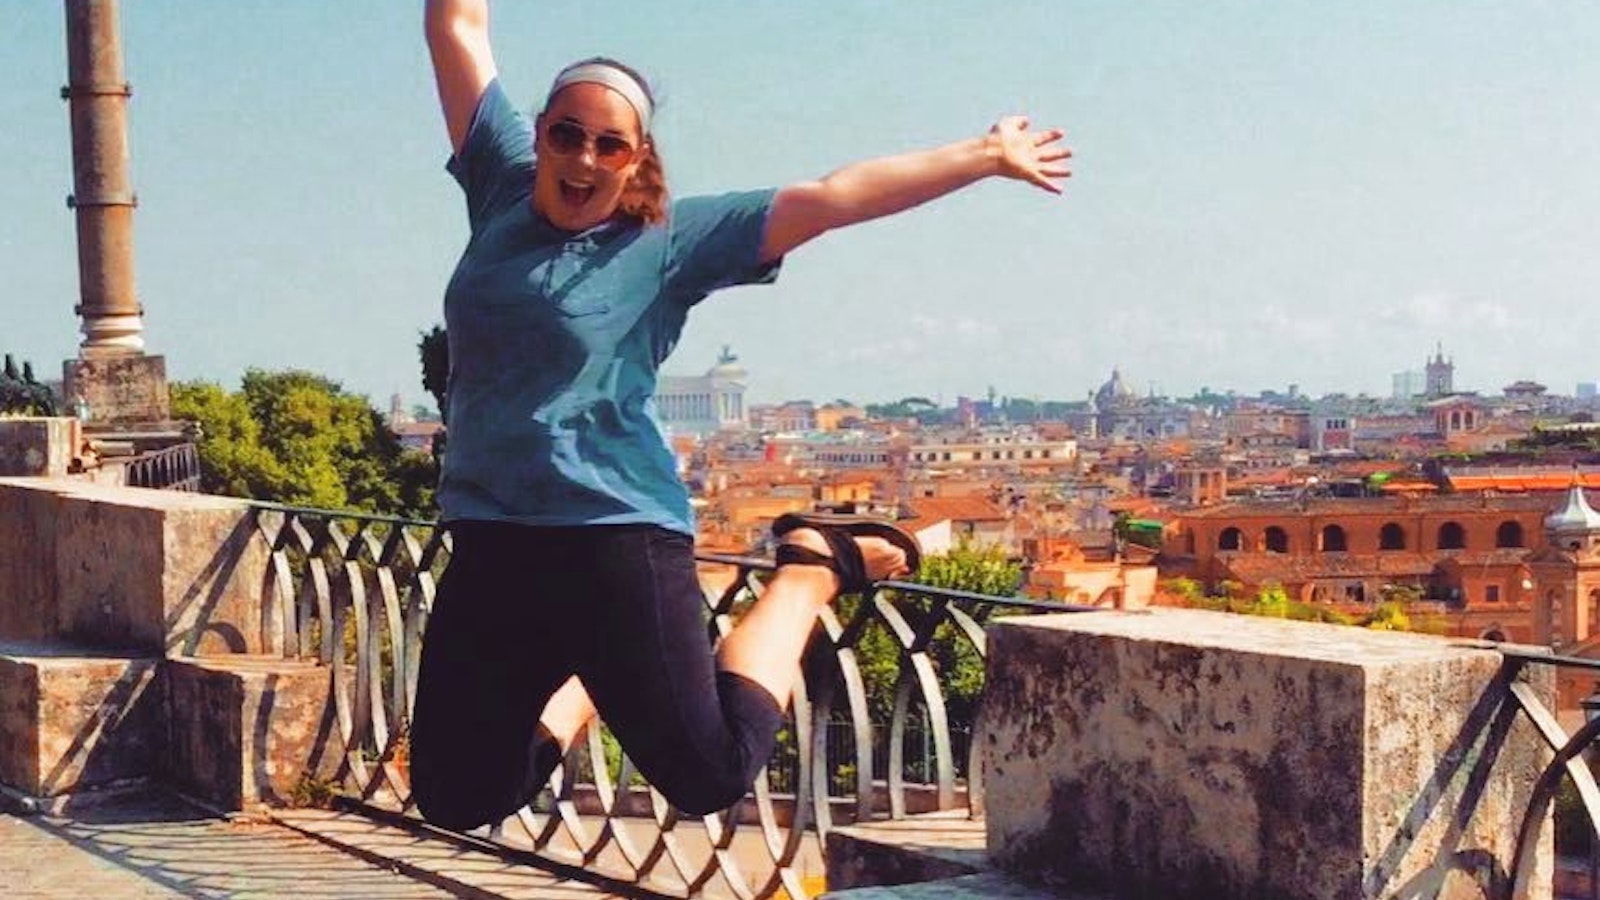 Student jumping in Rome